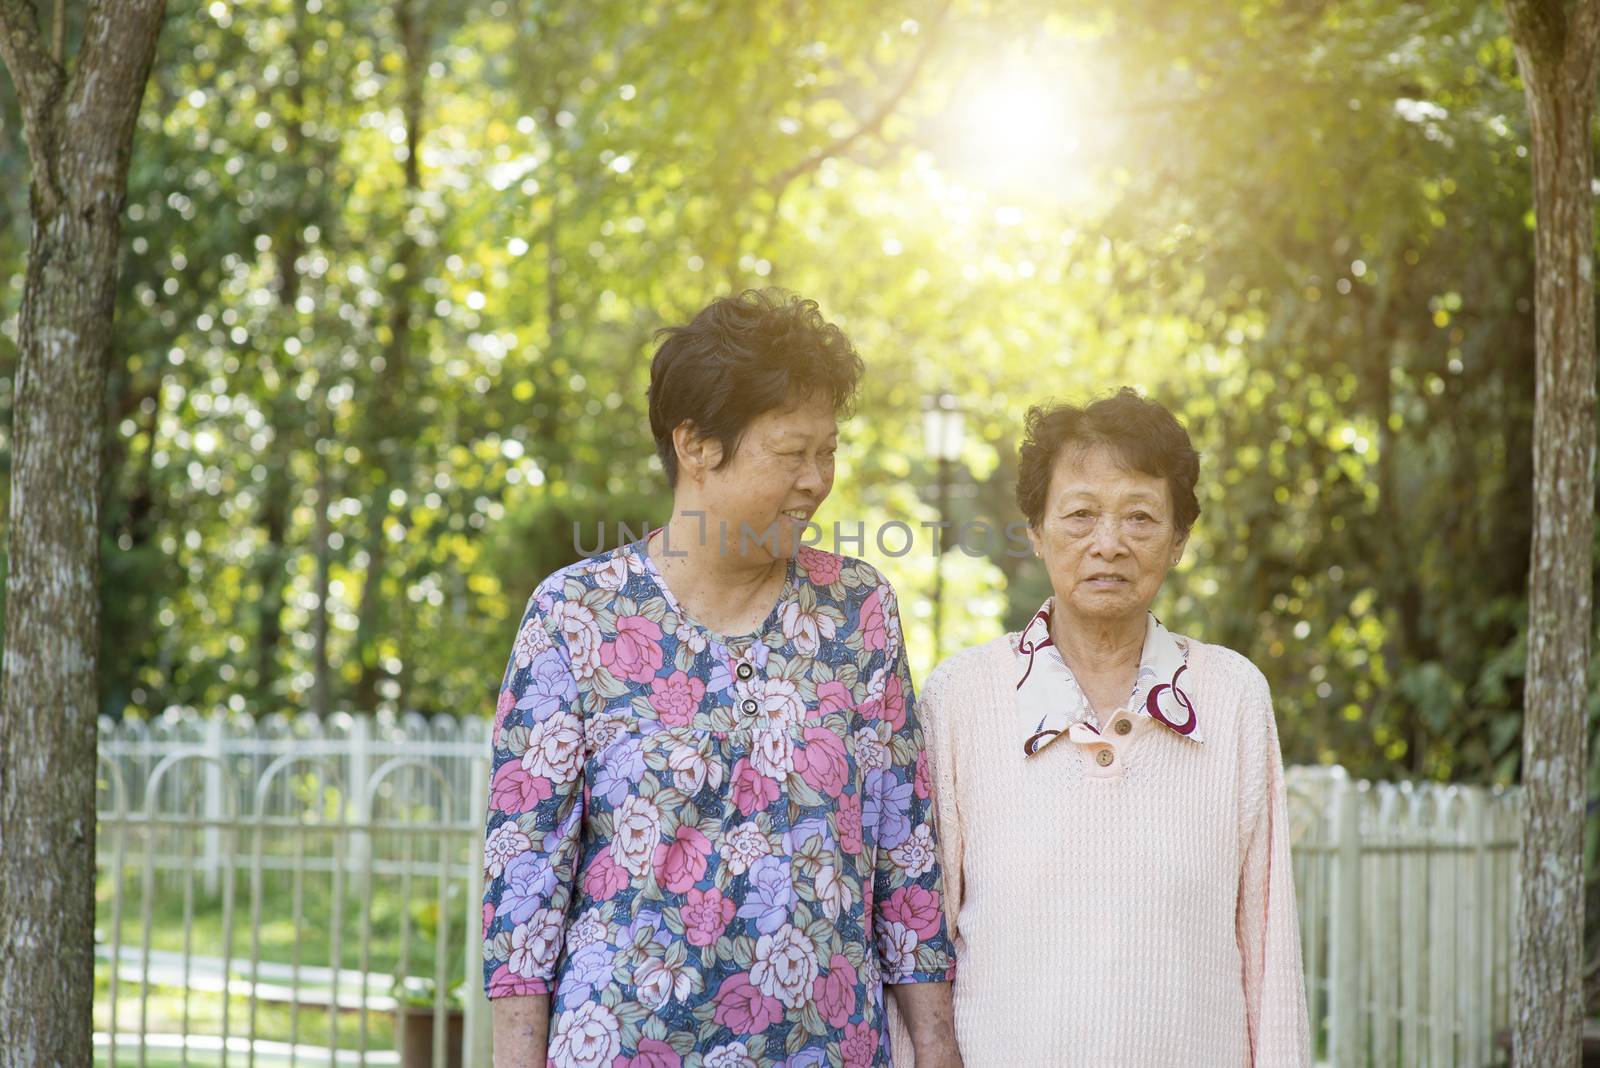 Candid shot of Asian old women walking at outdoor garden park in the morning.